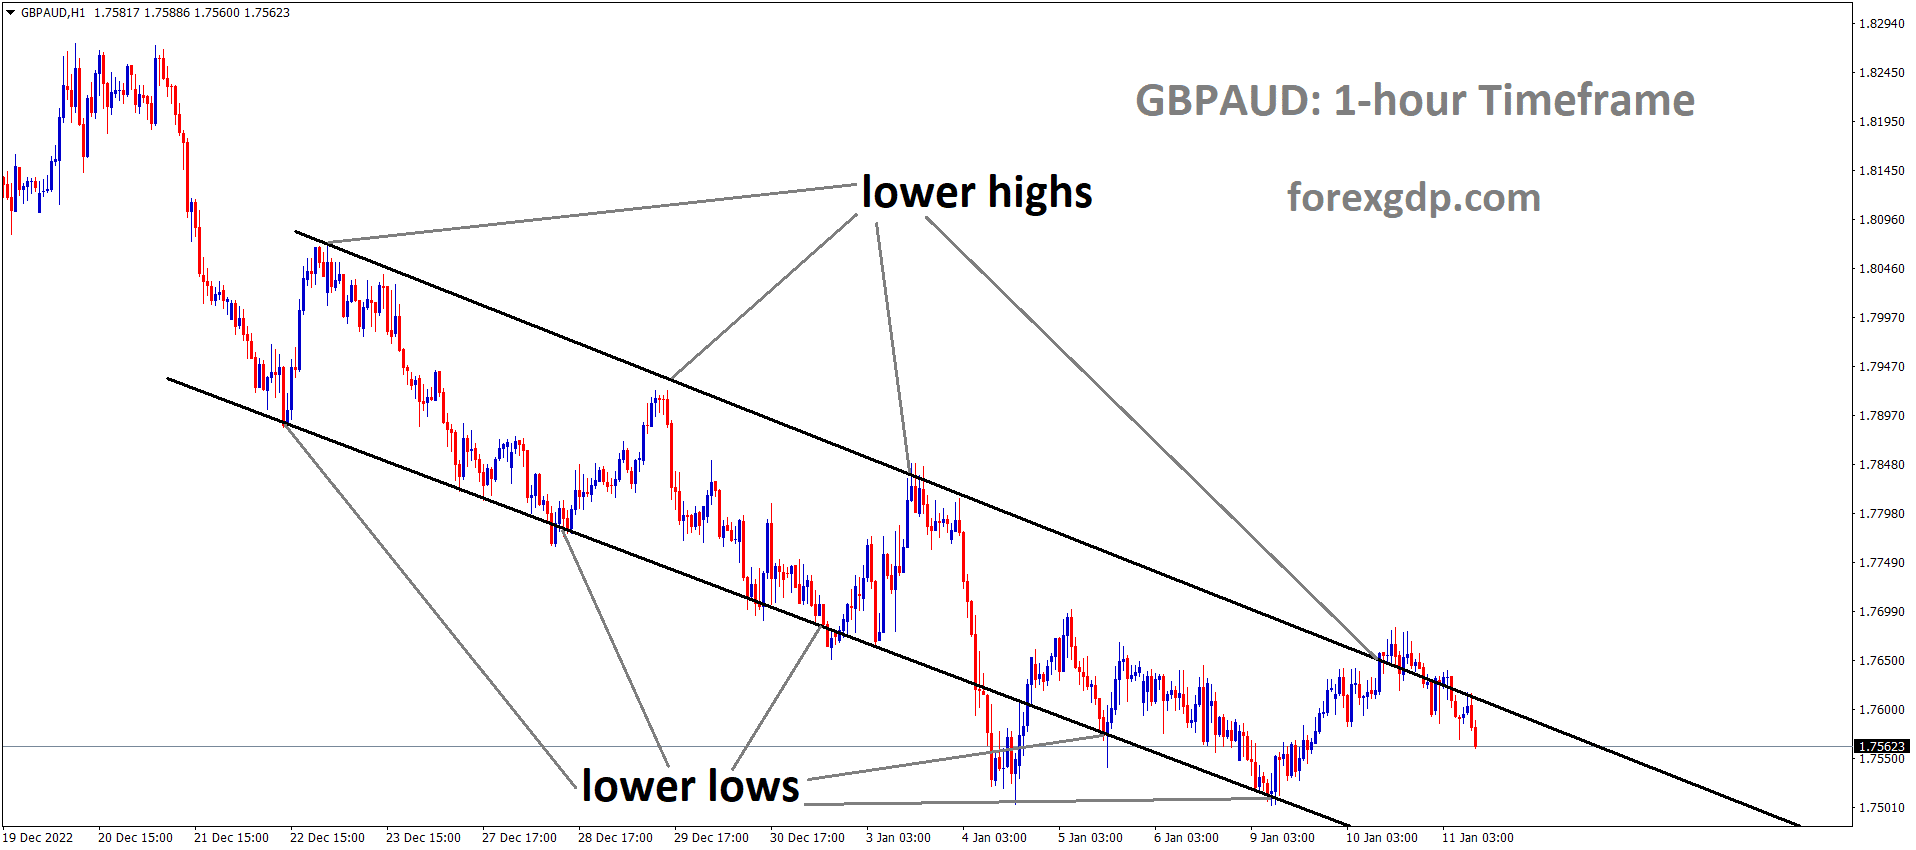 GBPAUD is moving in the Descending channel and the market has fallen from the lower high area of the channel